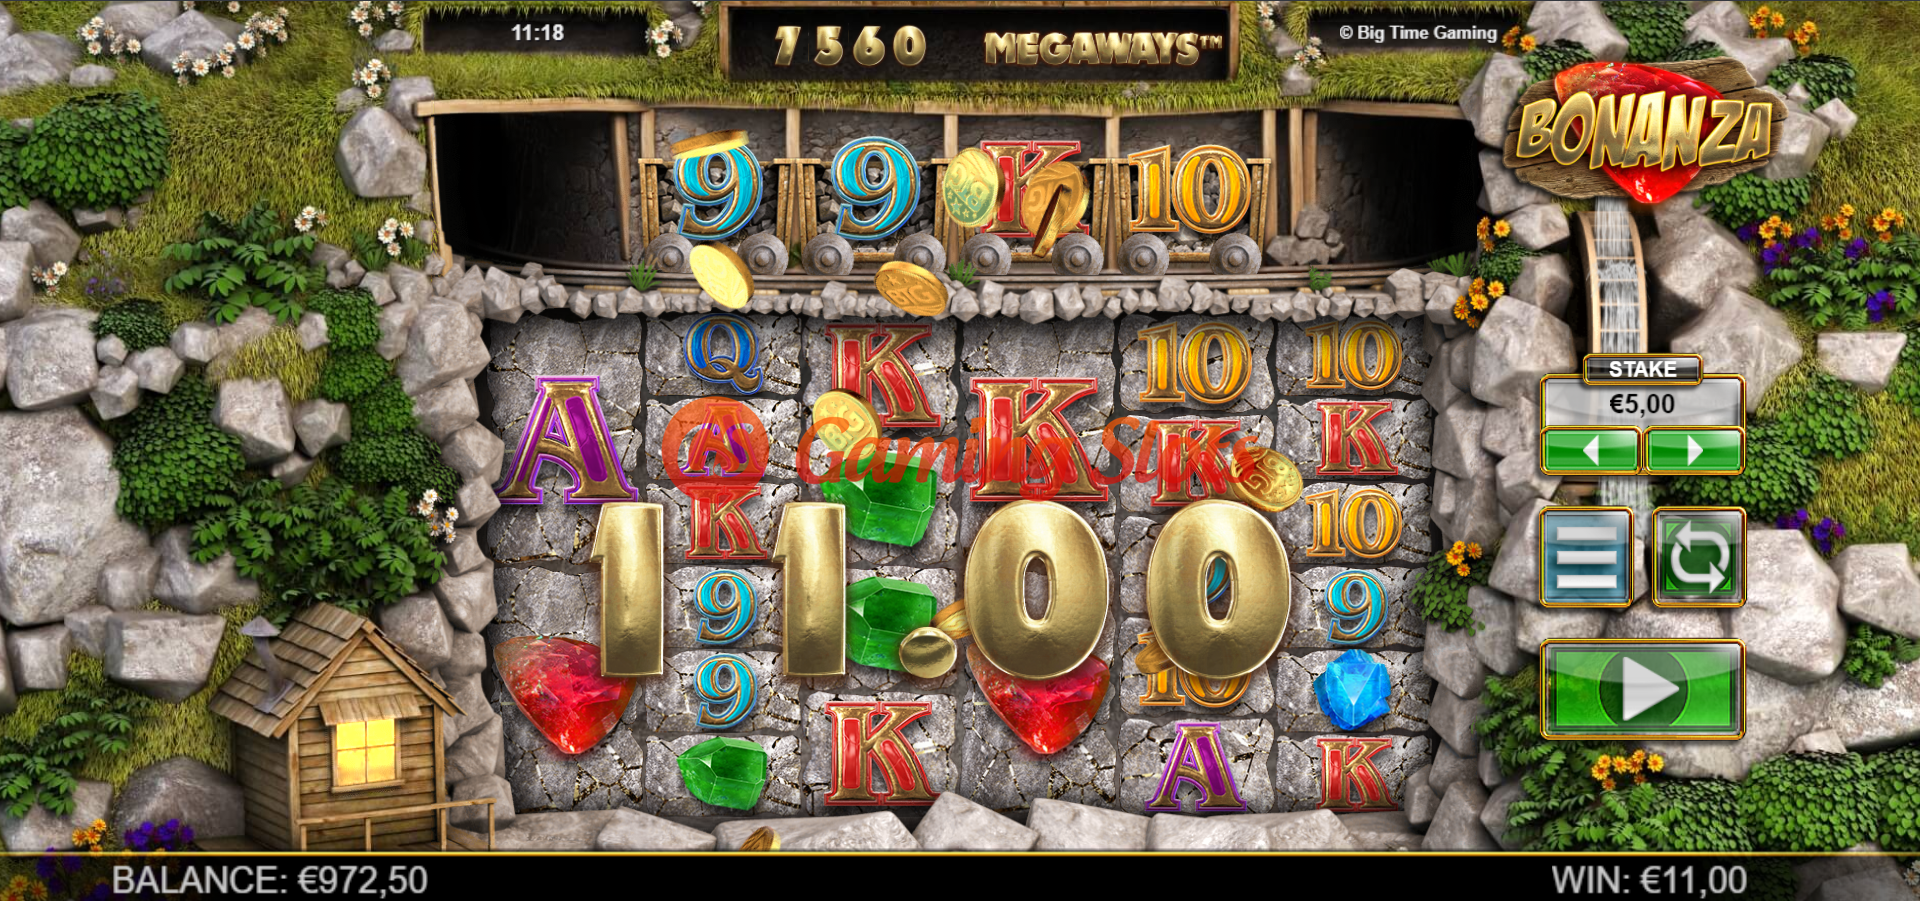 Base Game for Bonanza slot from Big Time Gaming